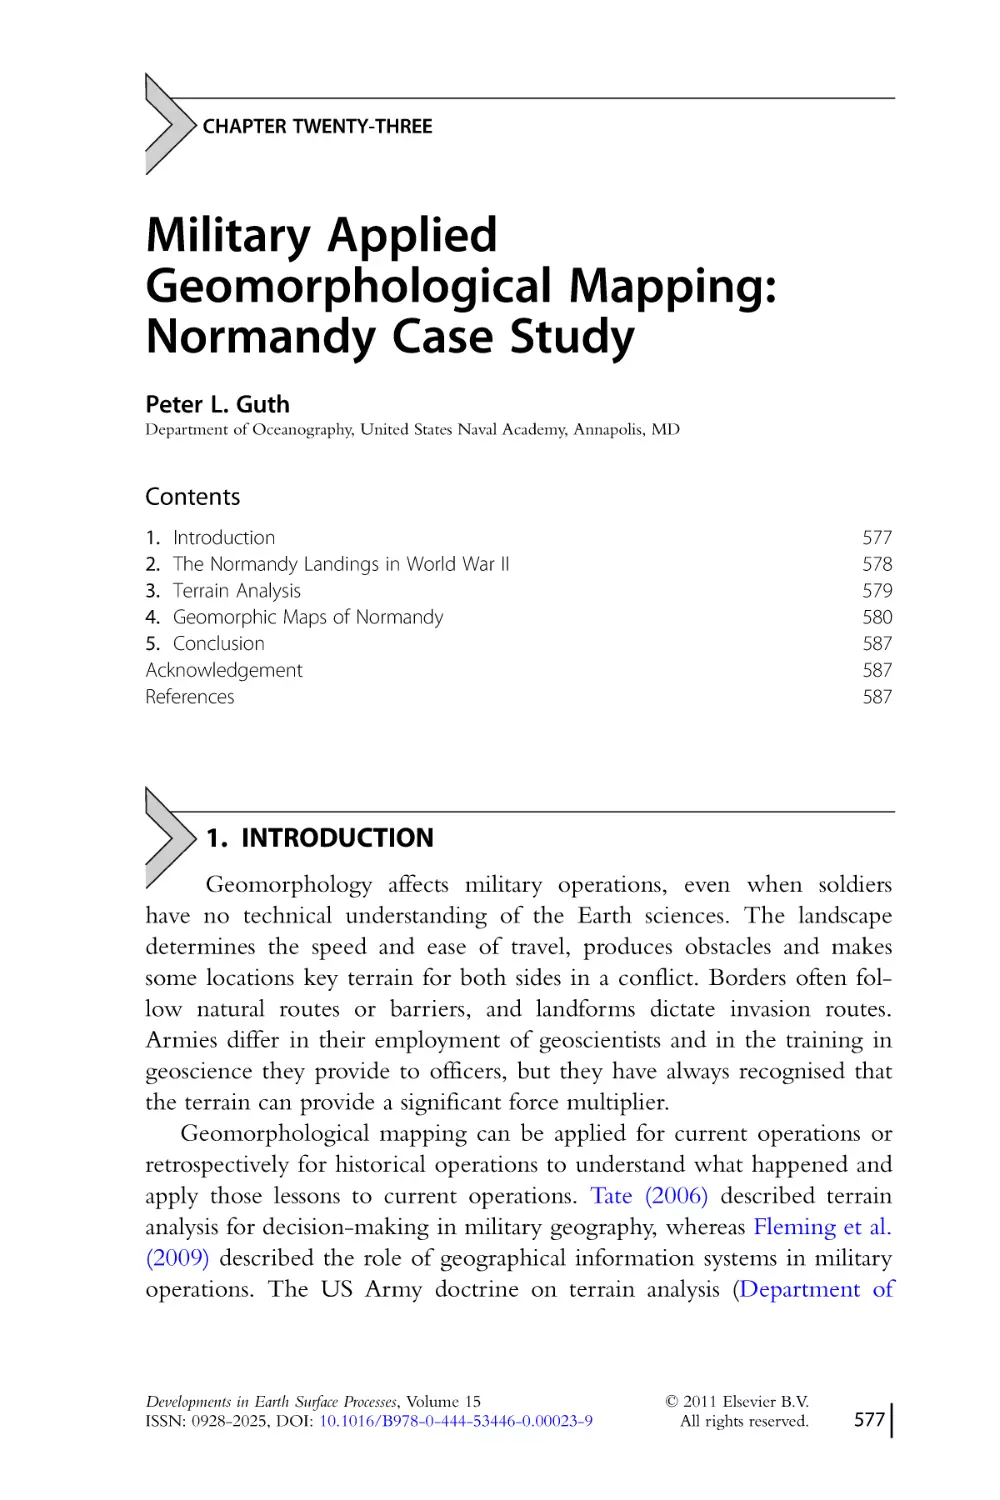 CHAPTER TWENTY-THREE
Military Applied
Geomorphological Mapping
1. Introduction